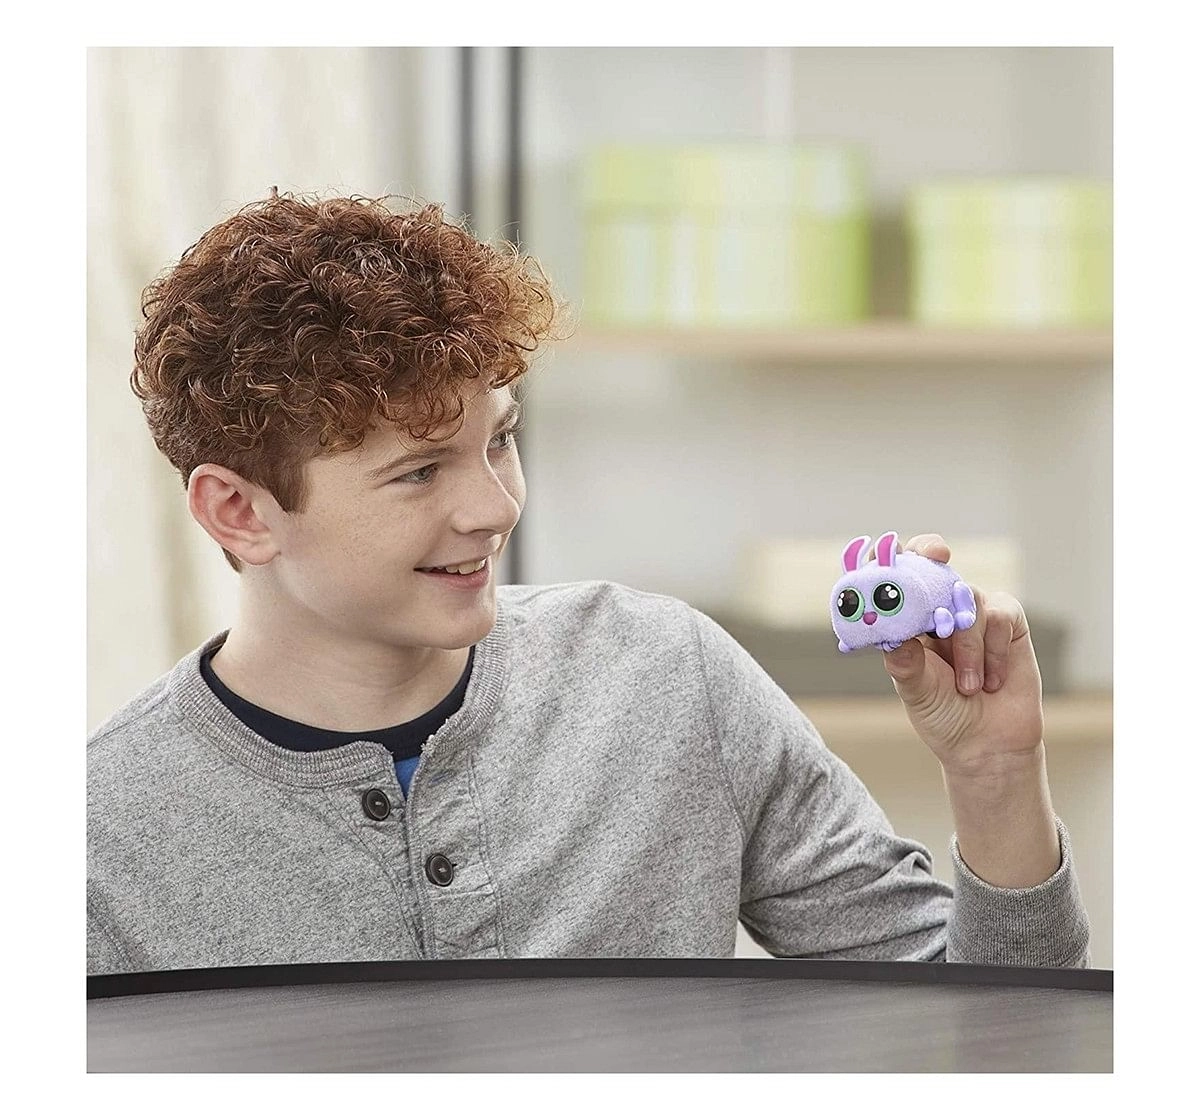 Yellies! Voice-Activated Spider Pet Assorted Impulse Toys for Kids age 5Y+ 